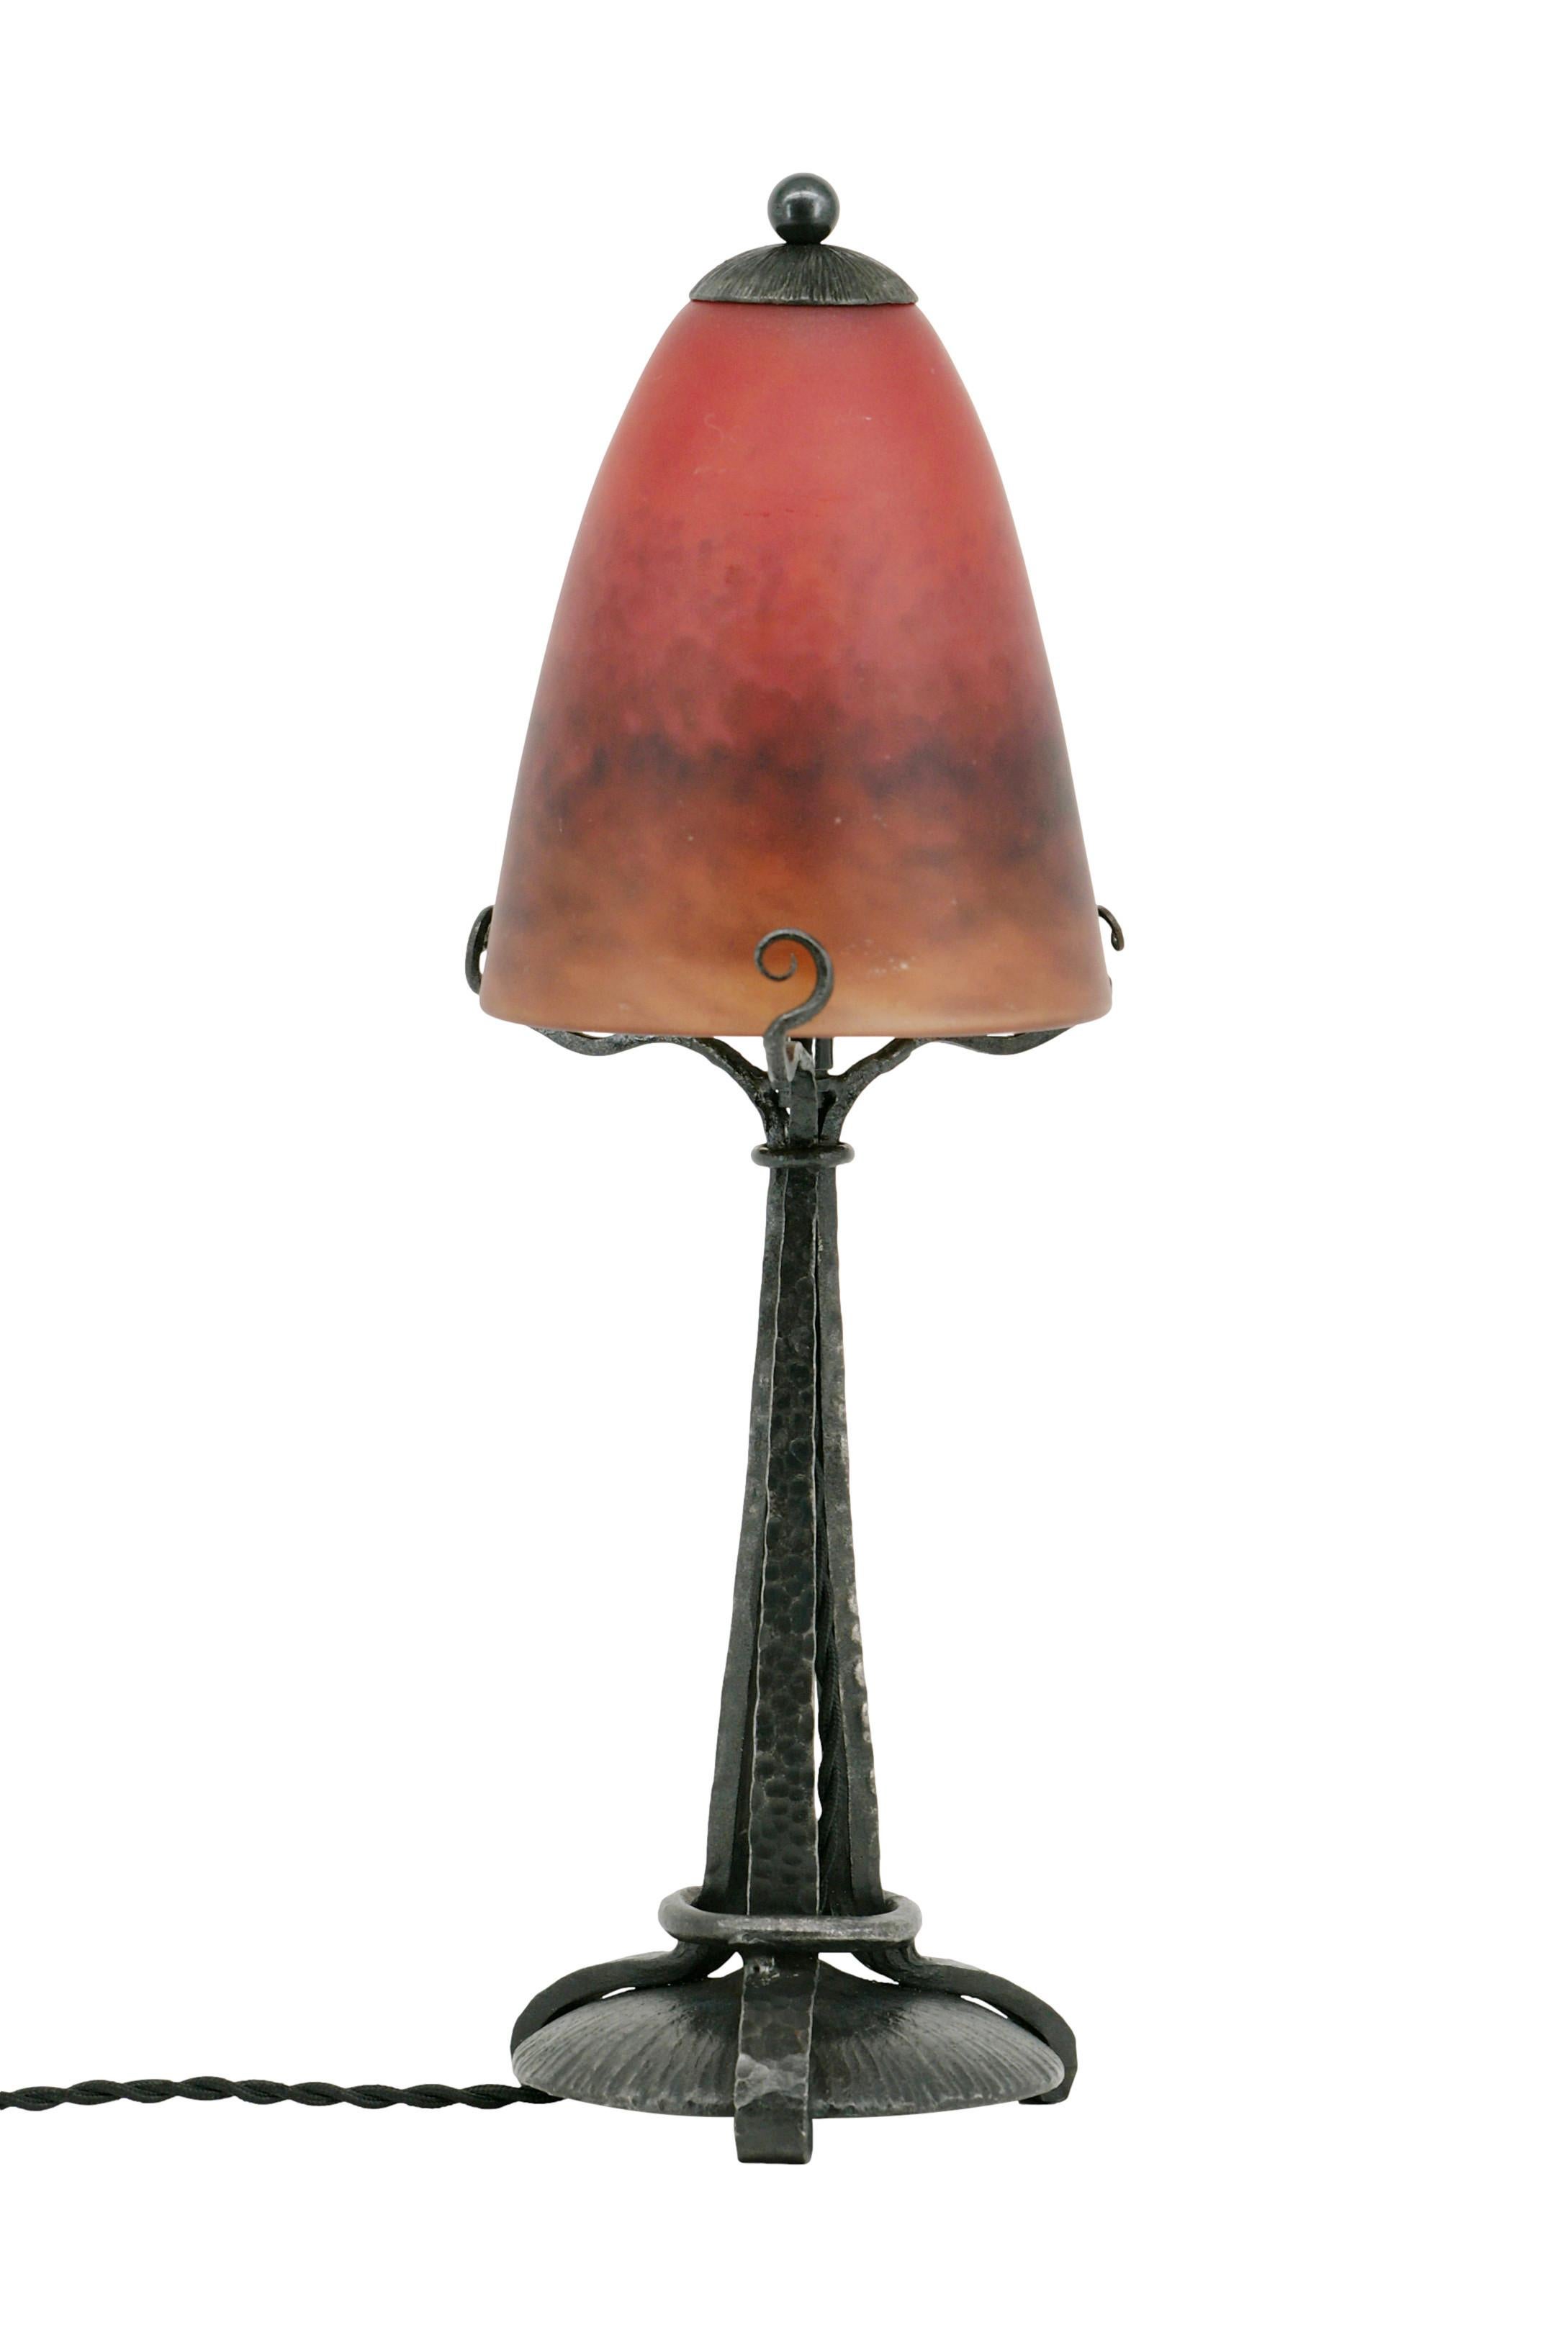 French Art Deco table lamp by Charles Schneider, Epinay-sur-Seine (Paris), 1924-1928. Mottled glass shade, powders are applied between two layers that comes on its elegant wrought-iron fixture. Height : 15.5